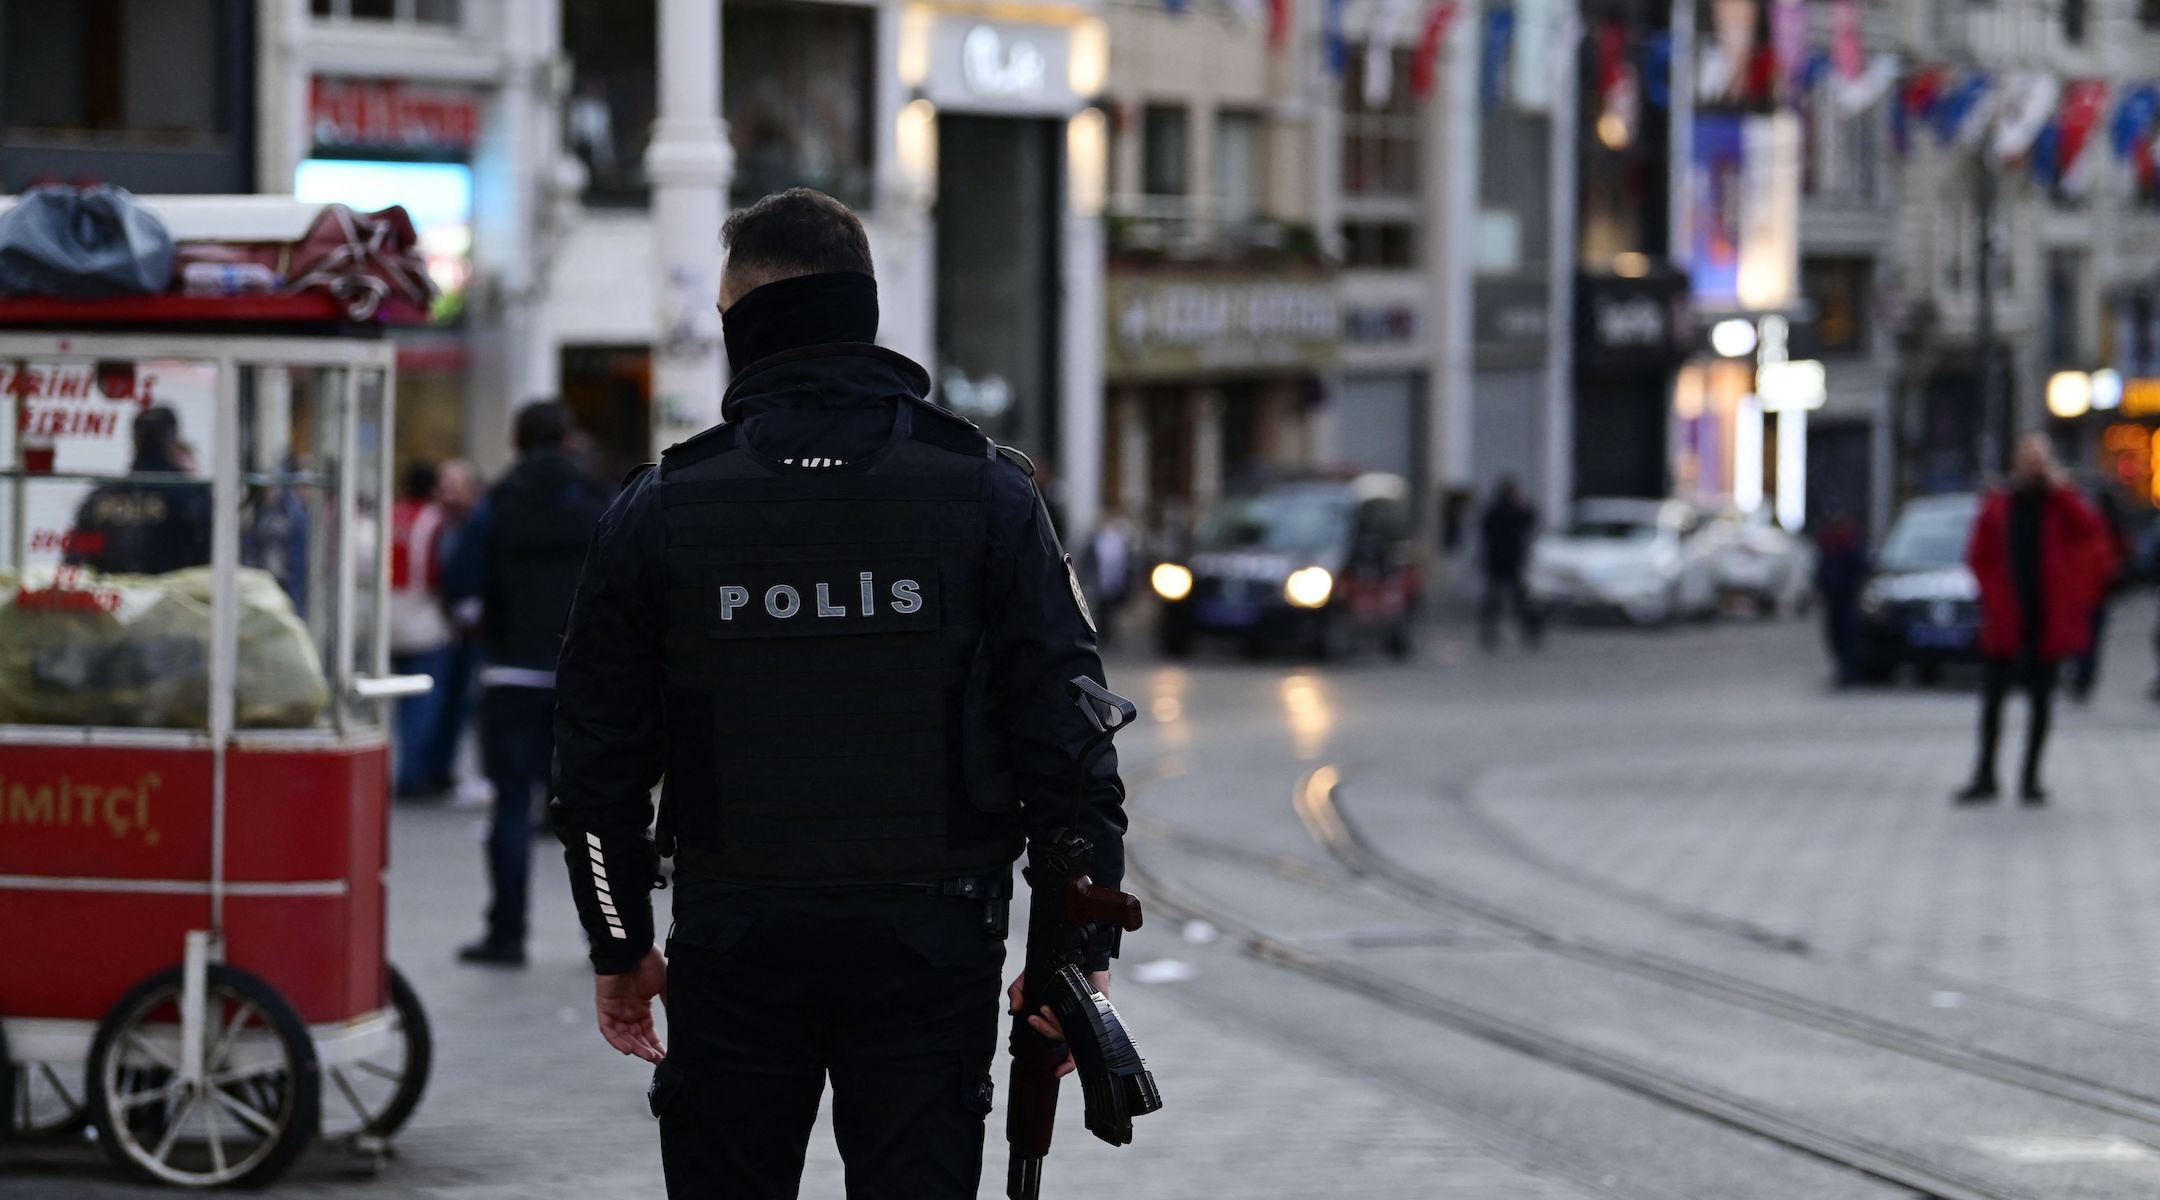 A Turkish police officer is seen in Istanbul, Nov. 13, 2022. (Yasul Akgul/AFP via Getty Images)